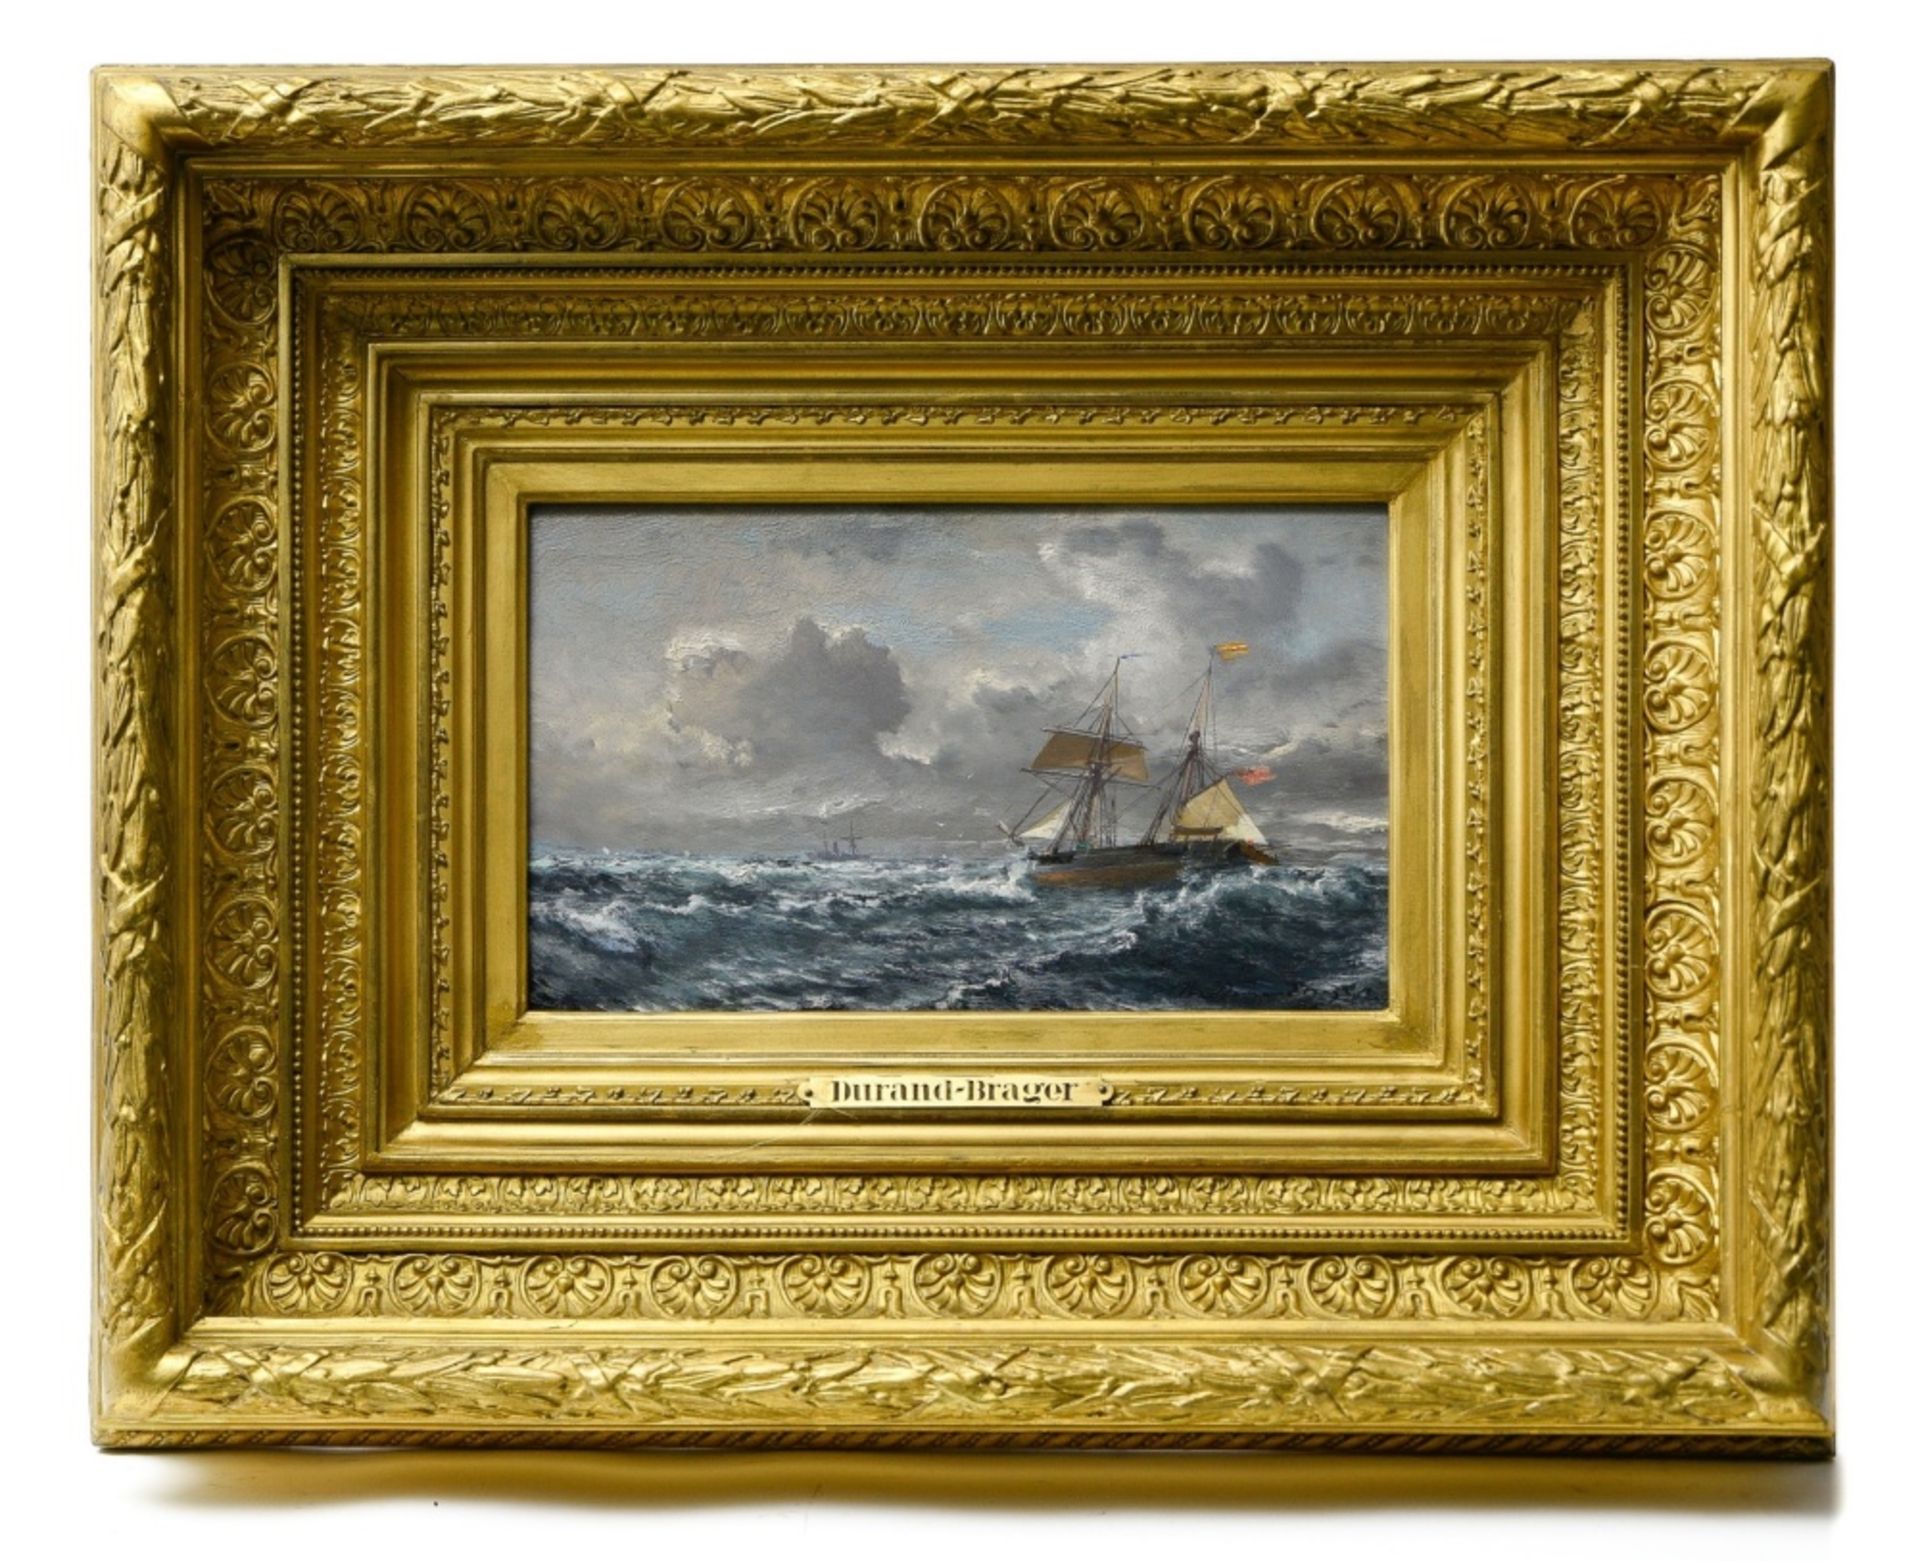 Jean-Baptiste Henri DURAND-BRAGER (1814-1879) In the storm, Oil on panel, signed at lower right. - Image 2 of 4